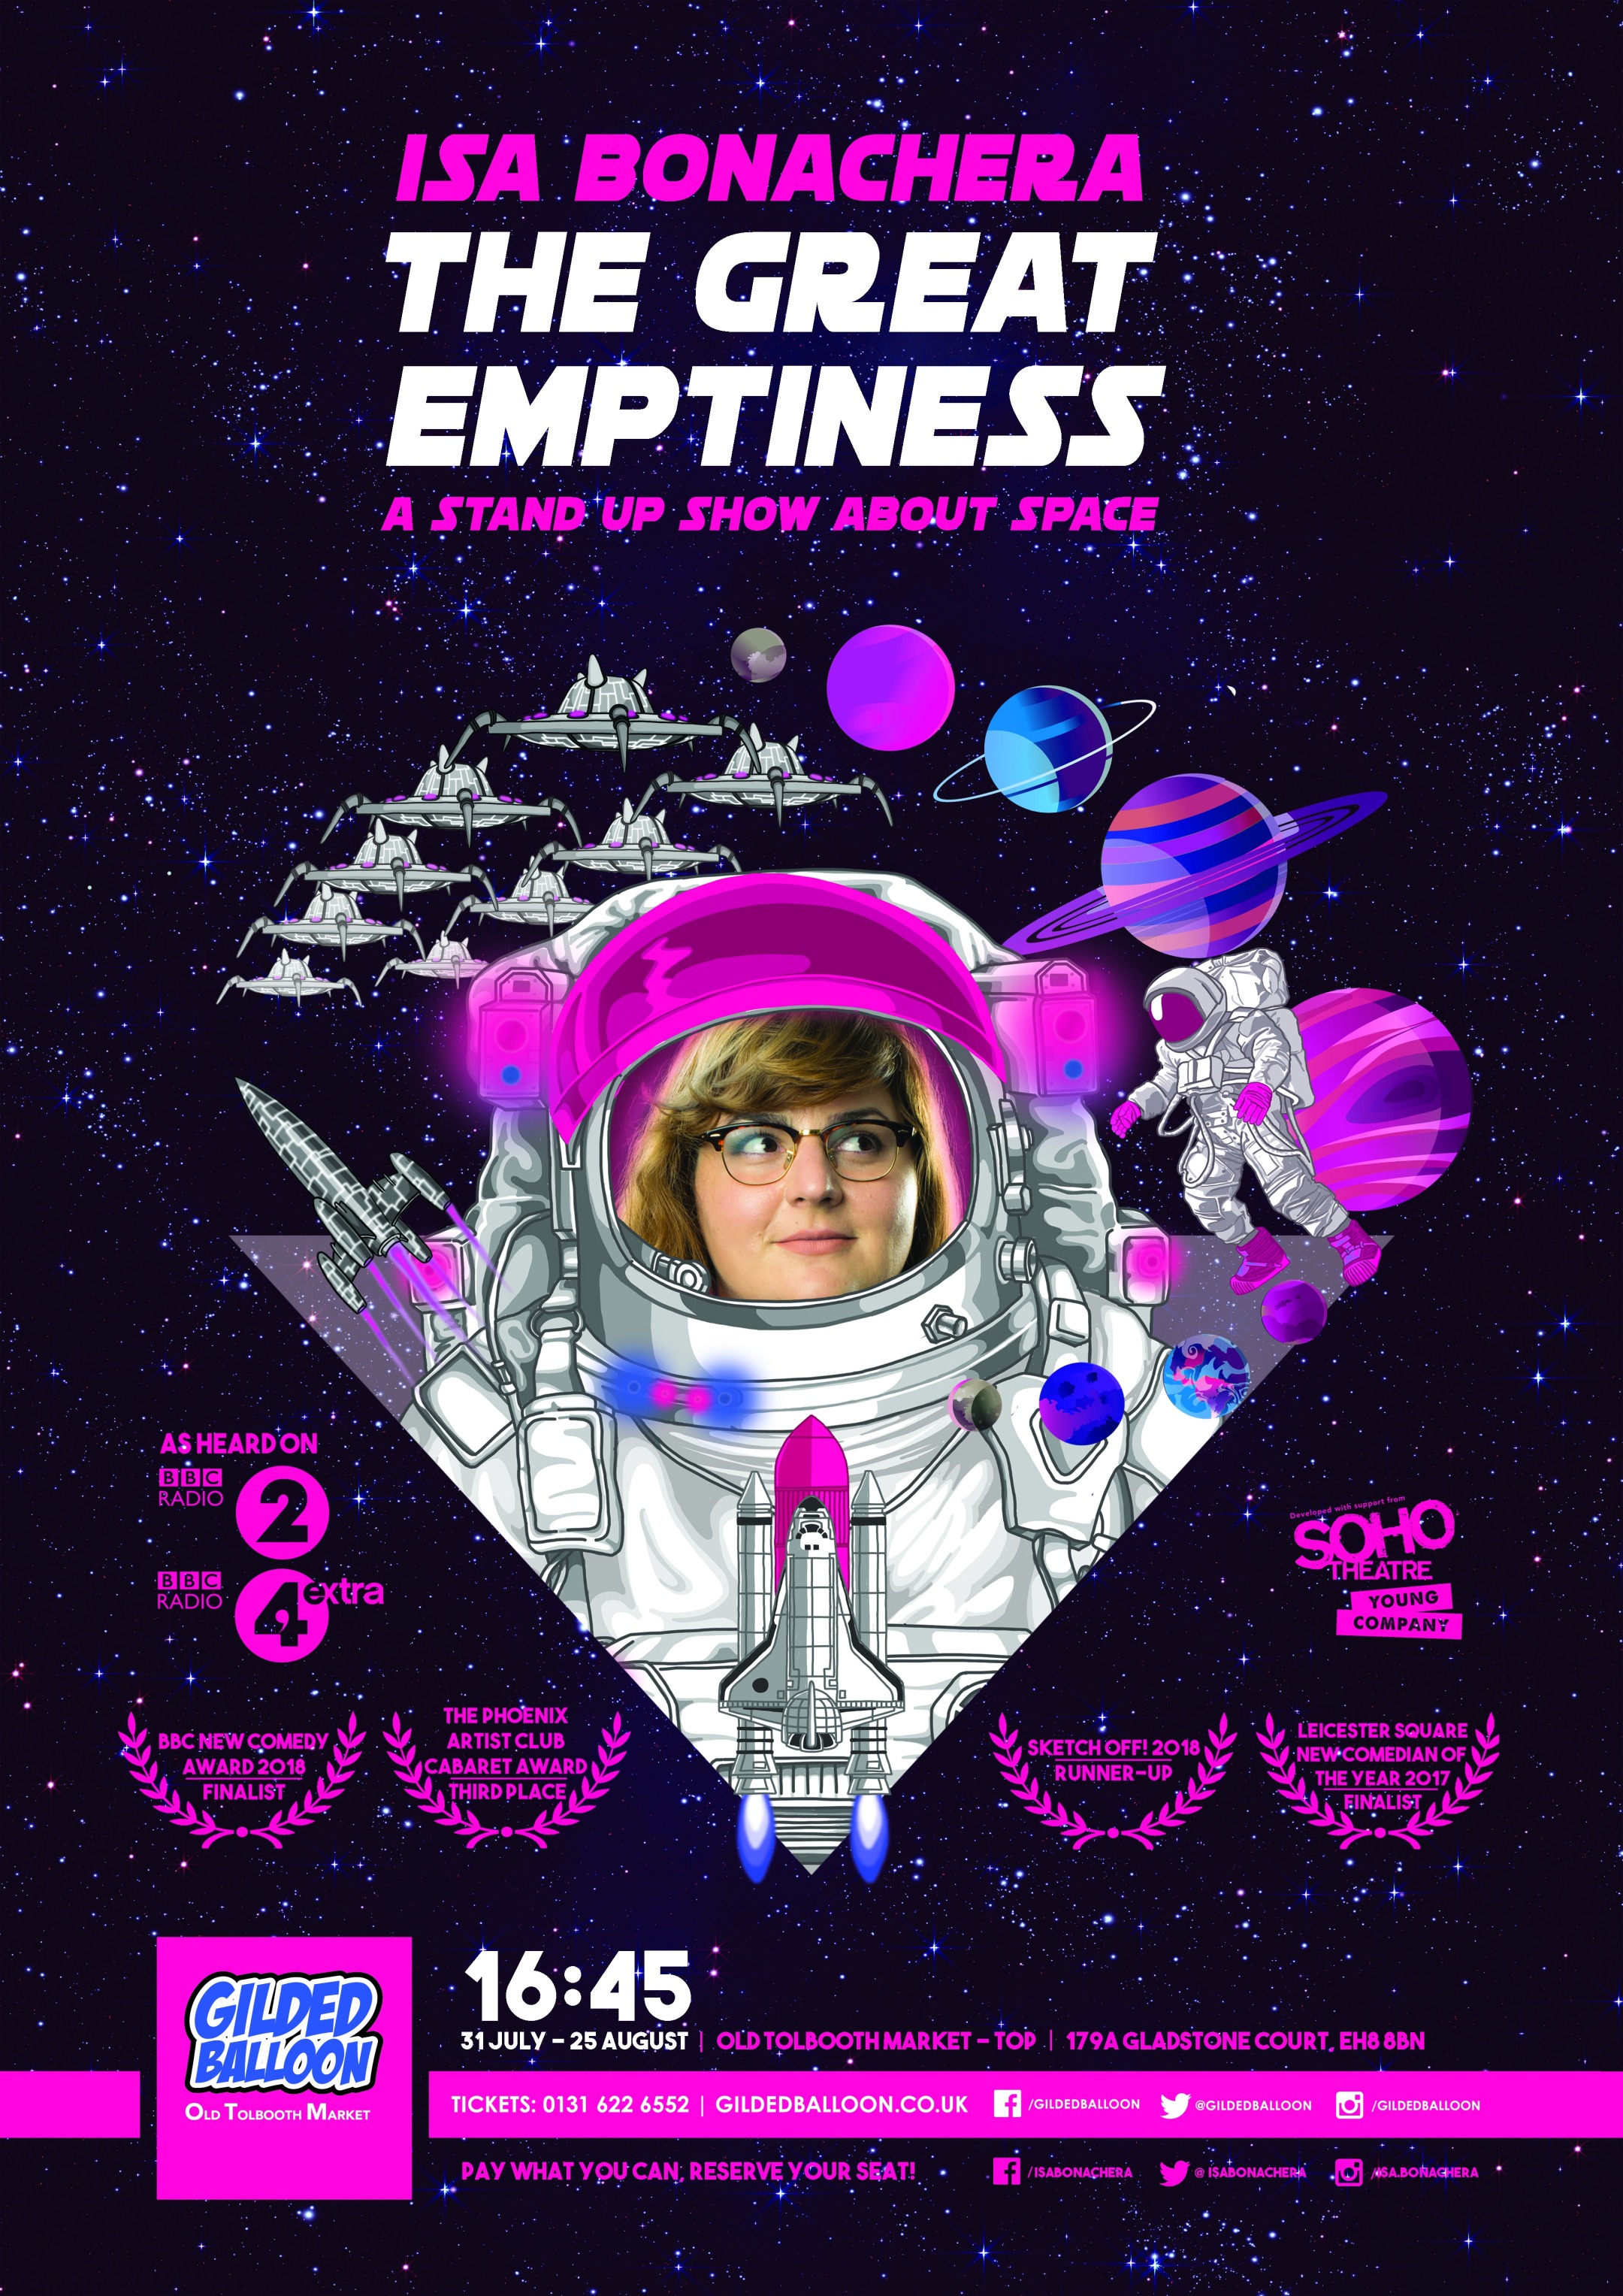 The poster for Isa Bonachera: The Great Emptiness